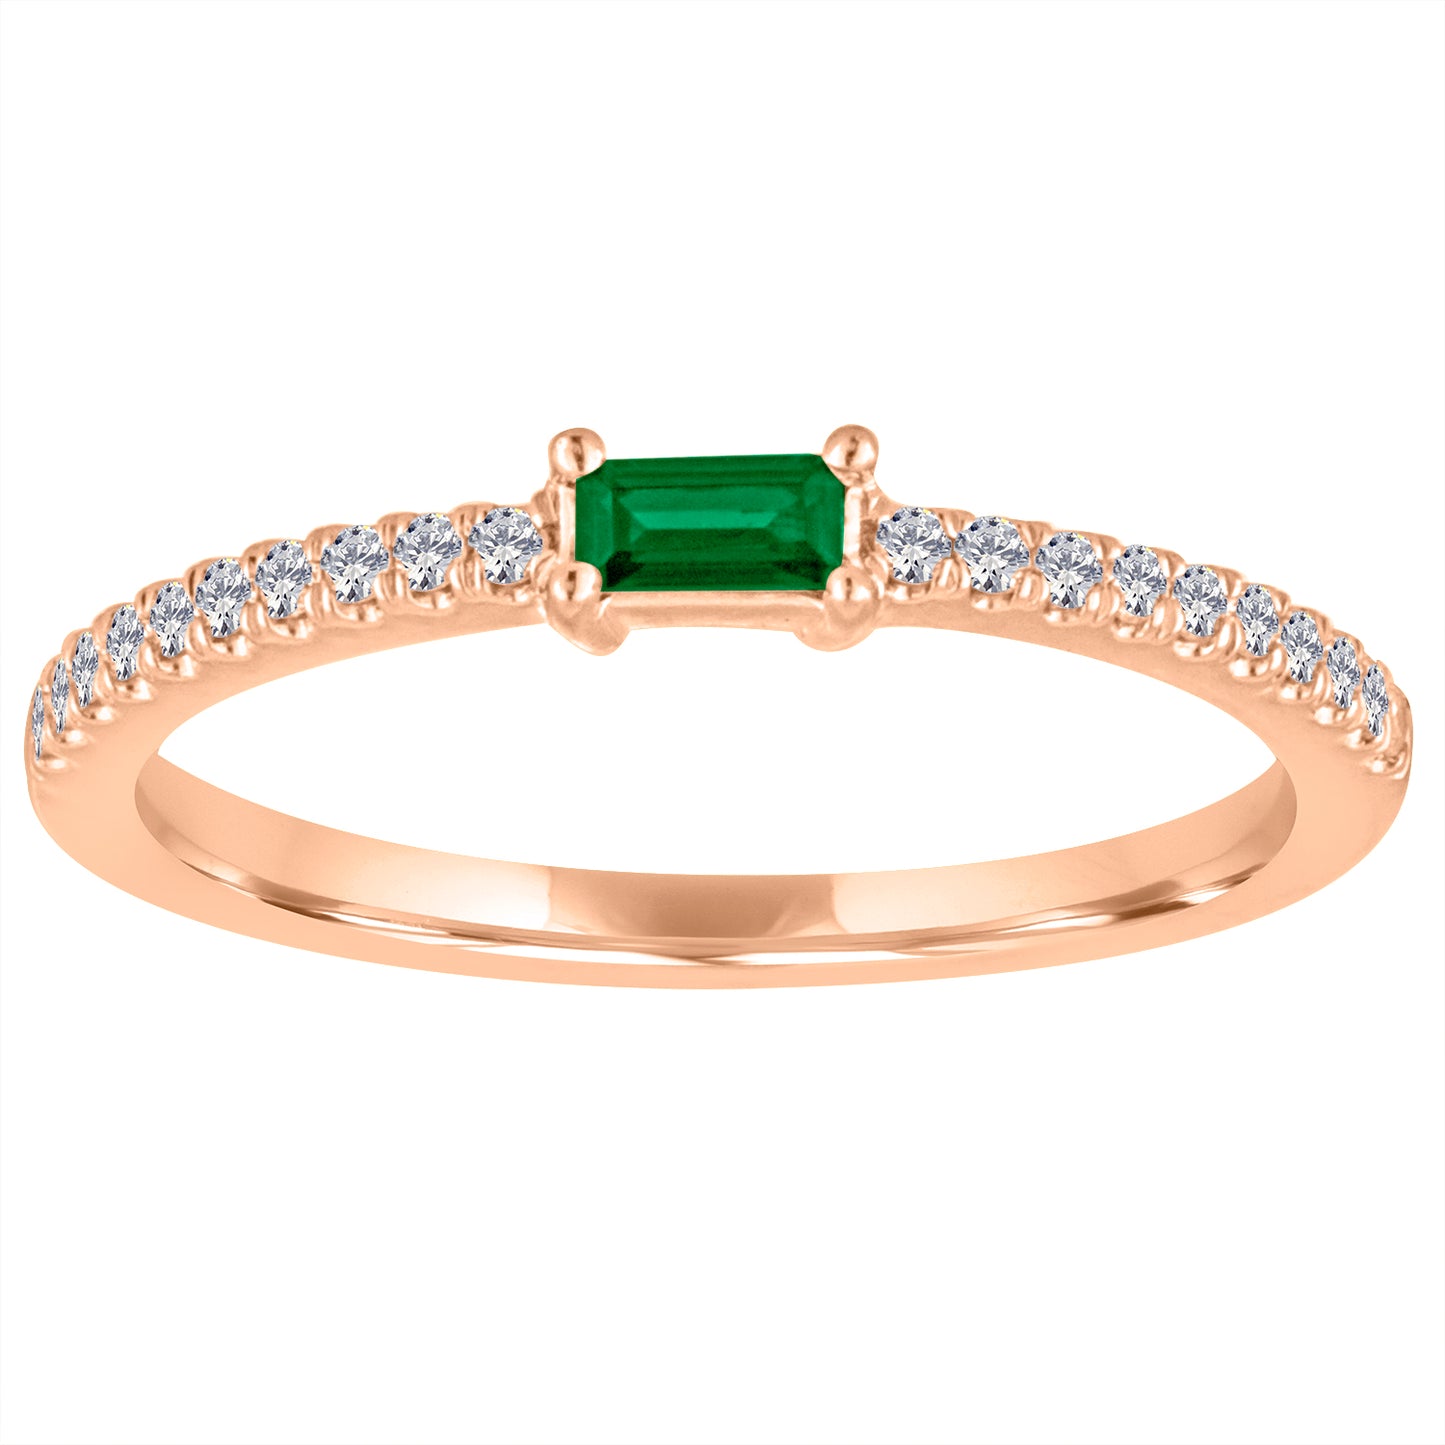 Rose gold skinny band with an emerald baguette in the center and round diamonds on the shank. 